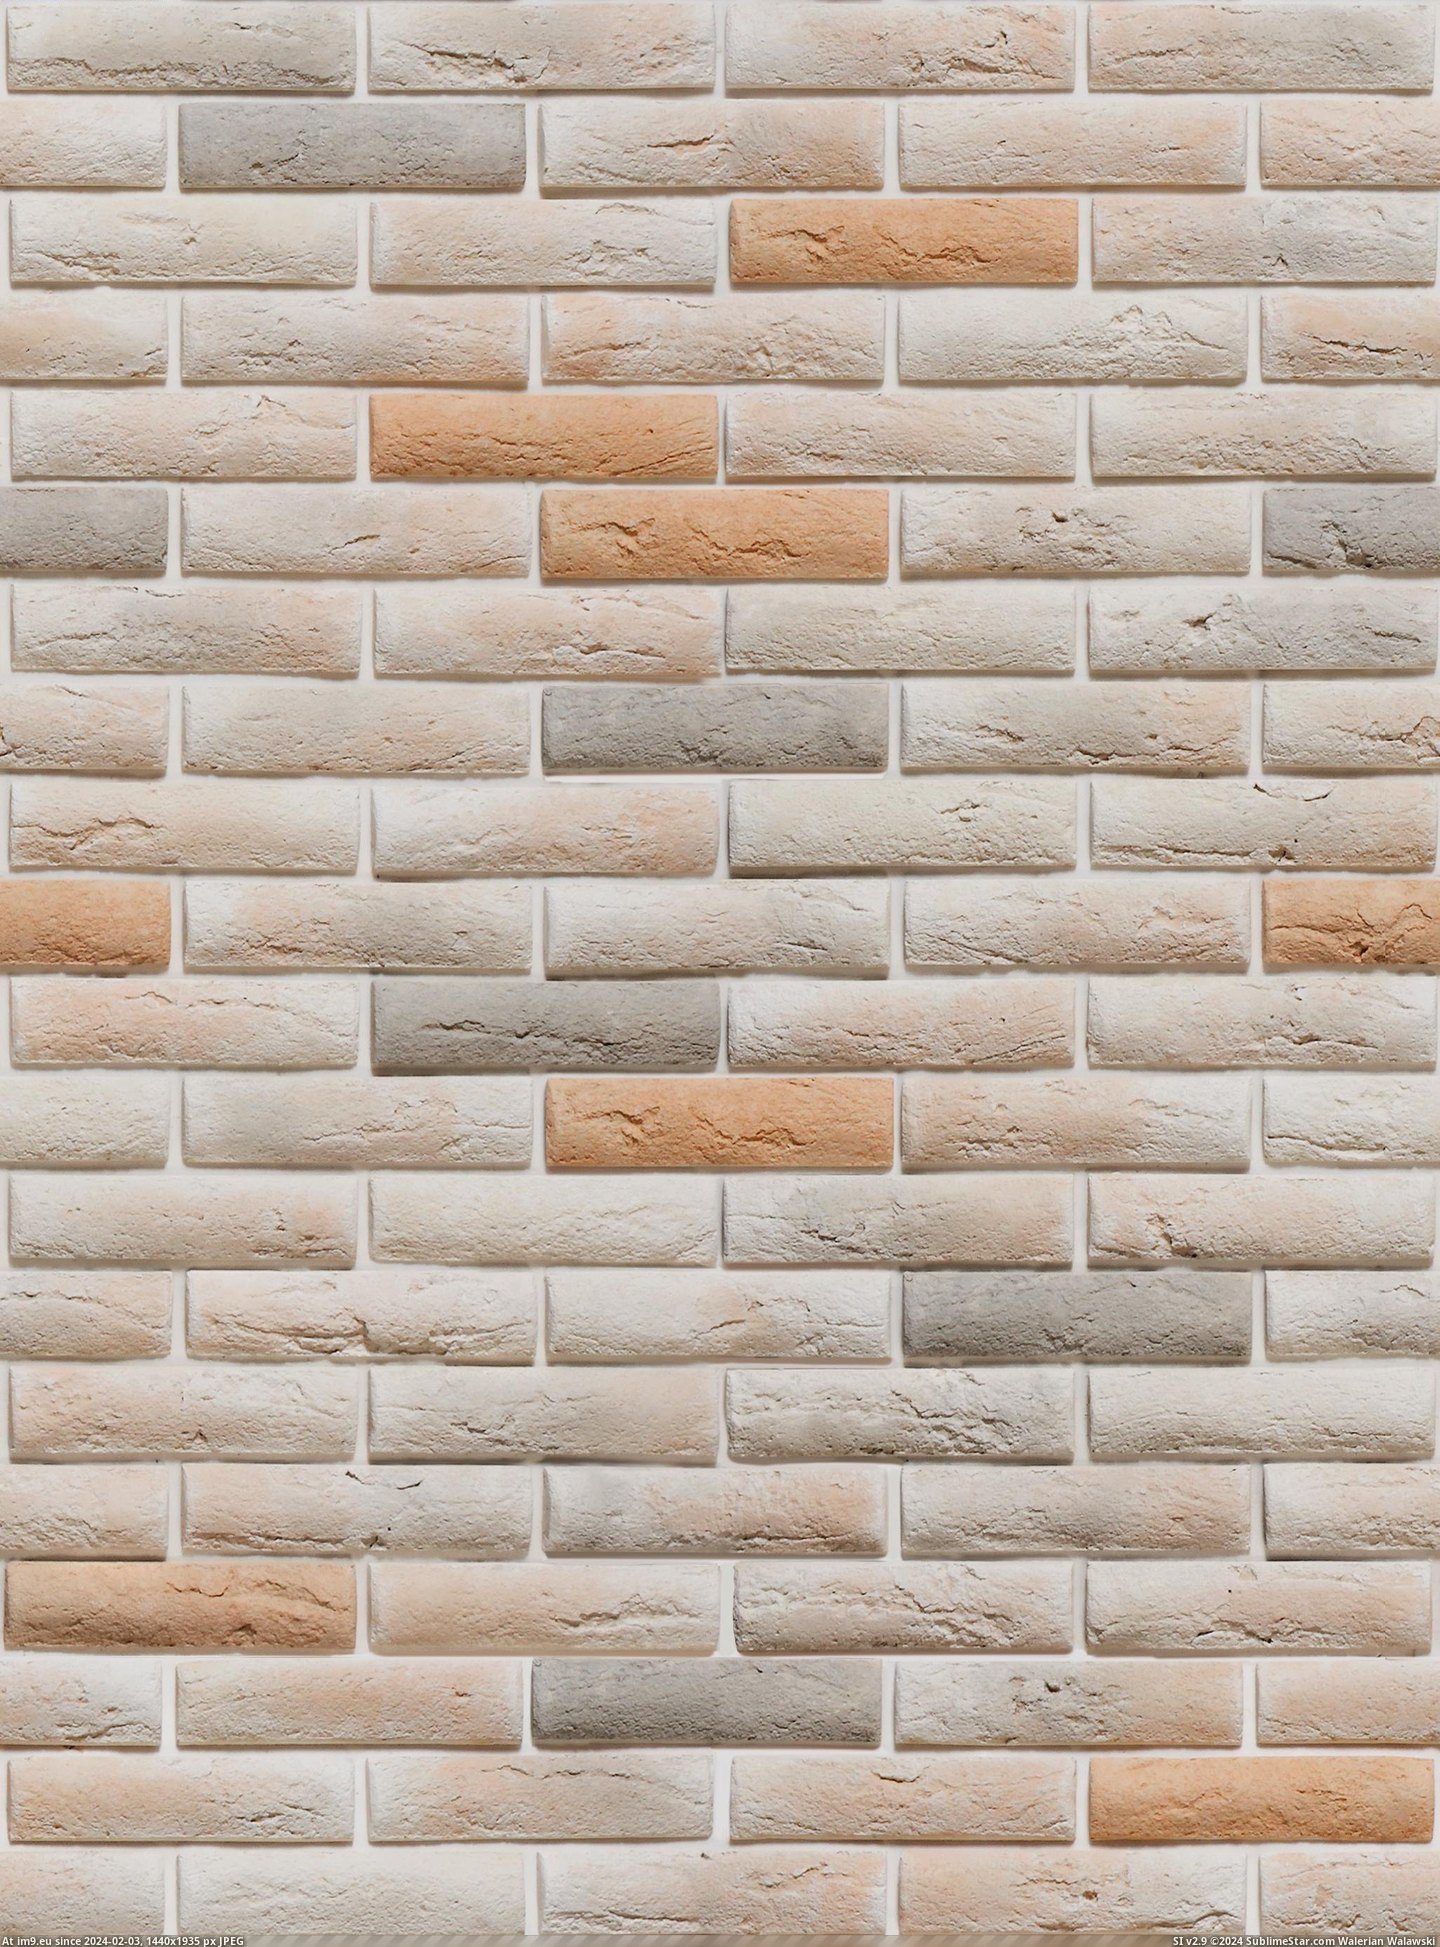 #Brick #Chester #Texture Chester (brick texture 1) Pic. (Image of album Brick walls textures and wallpapers))